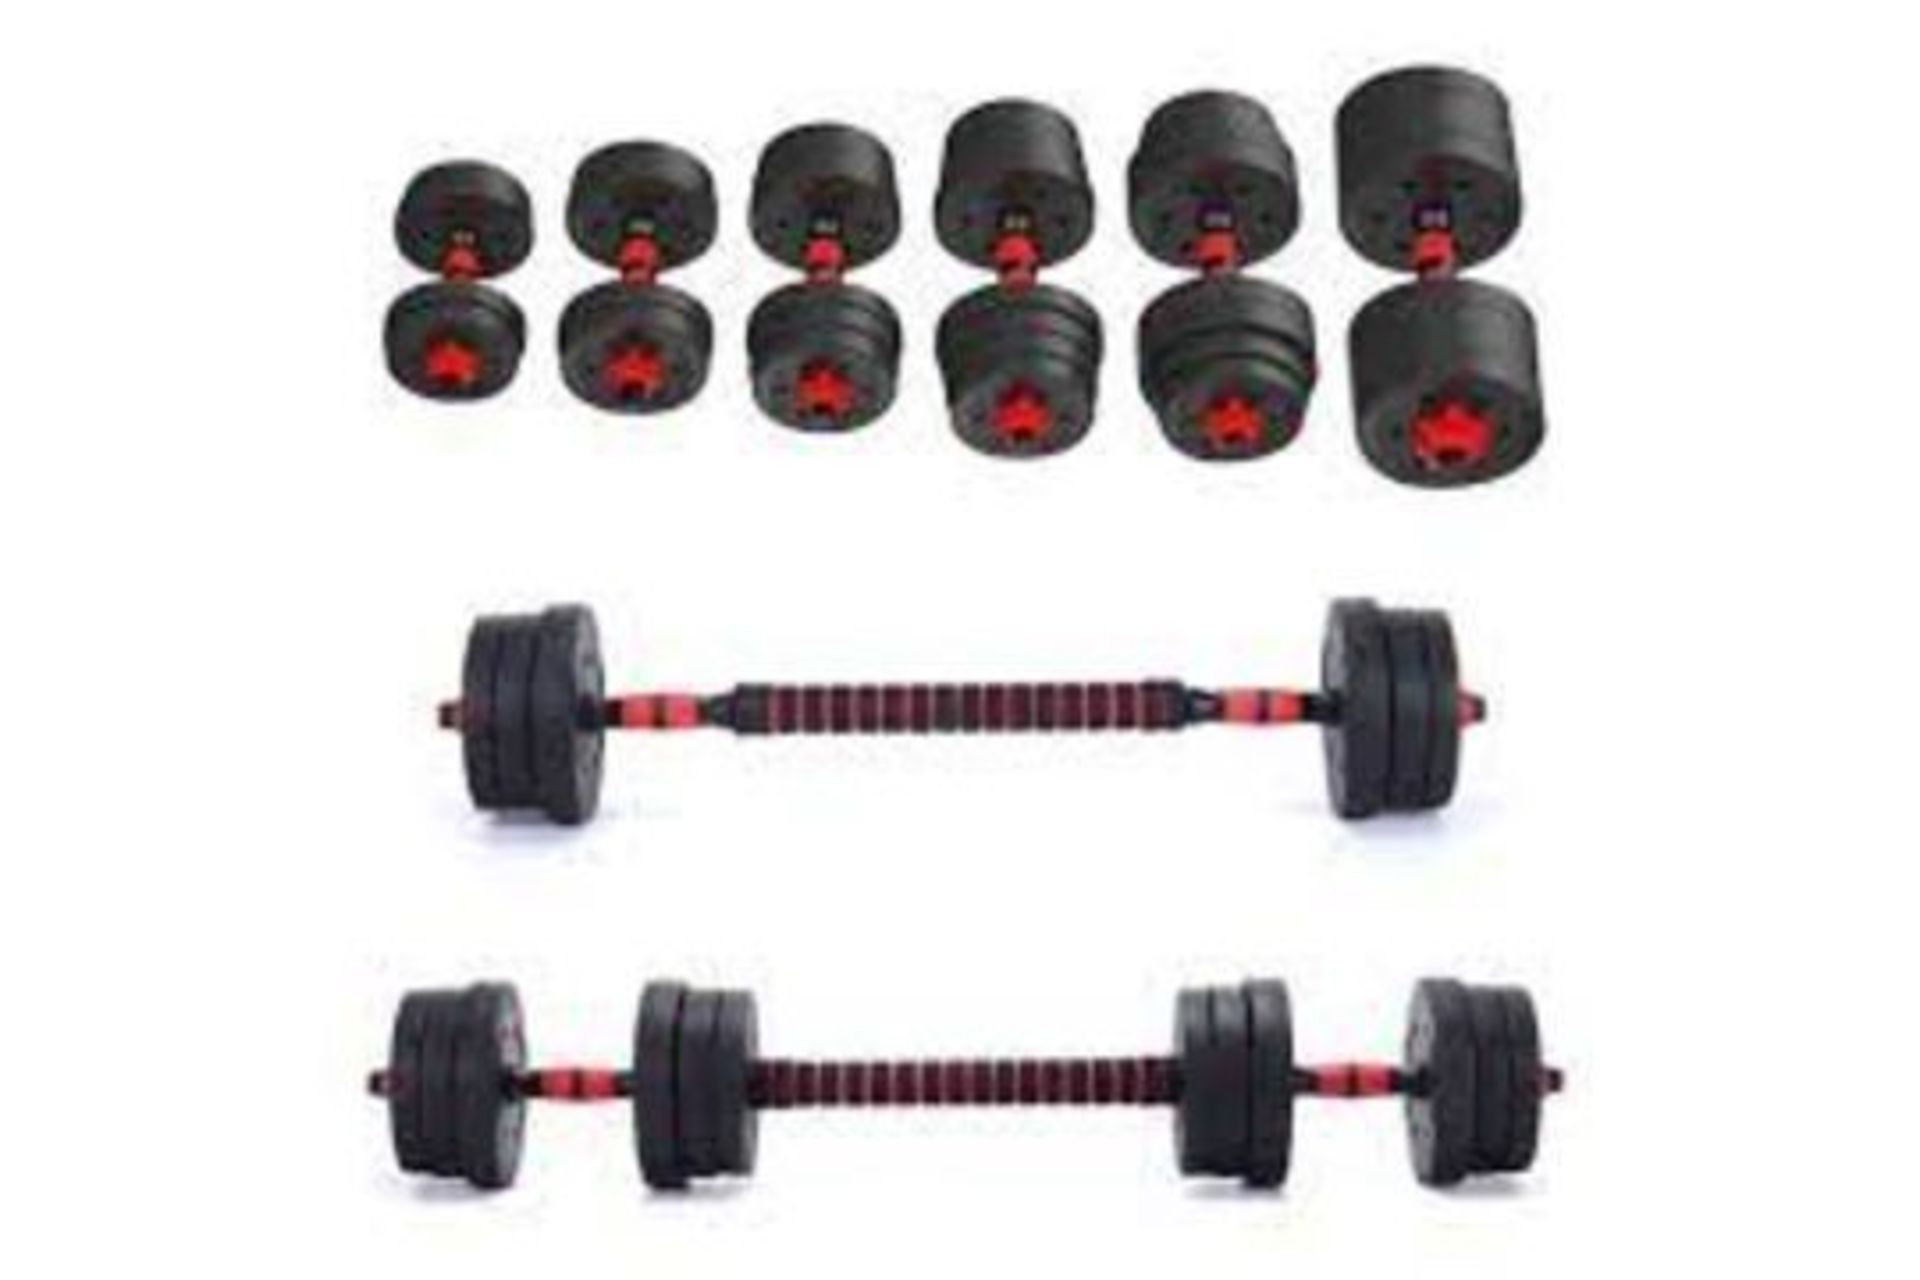 6 X BRAND ENW 10KG DUMBBELL BARBELL WEIGHT TRAINING SETS R15-8